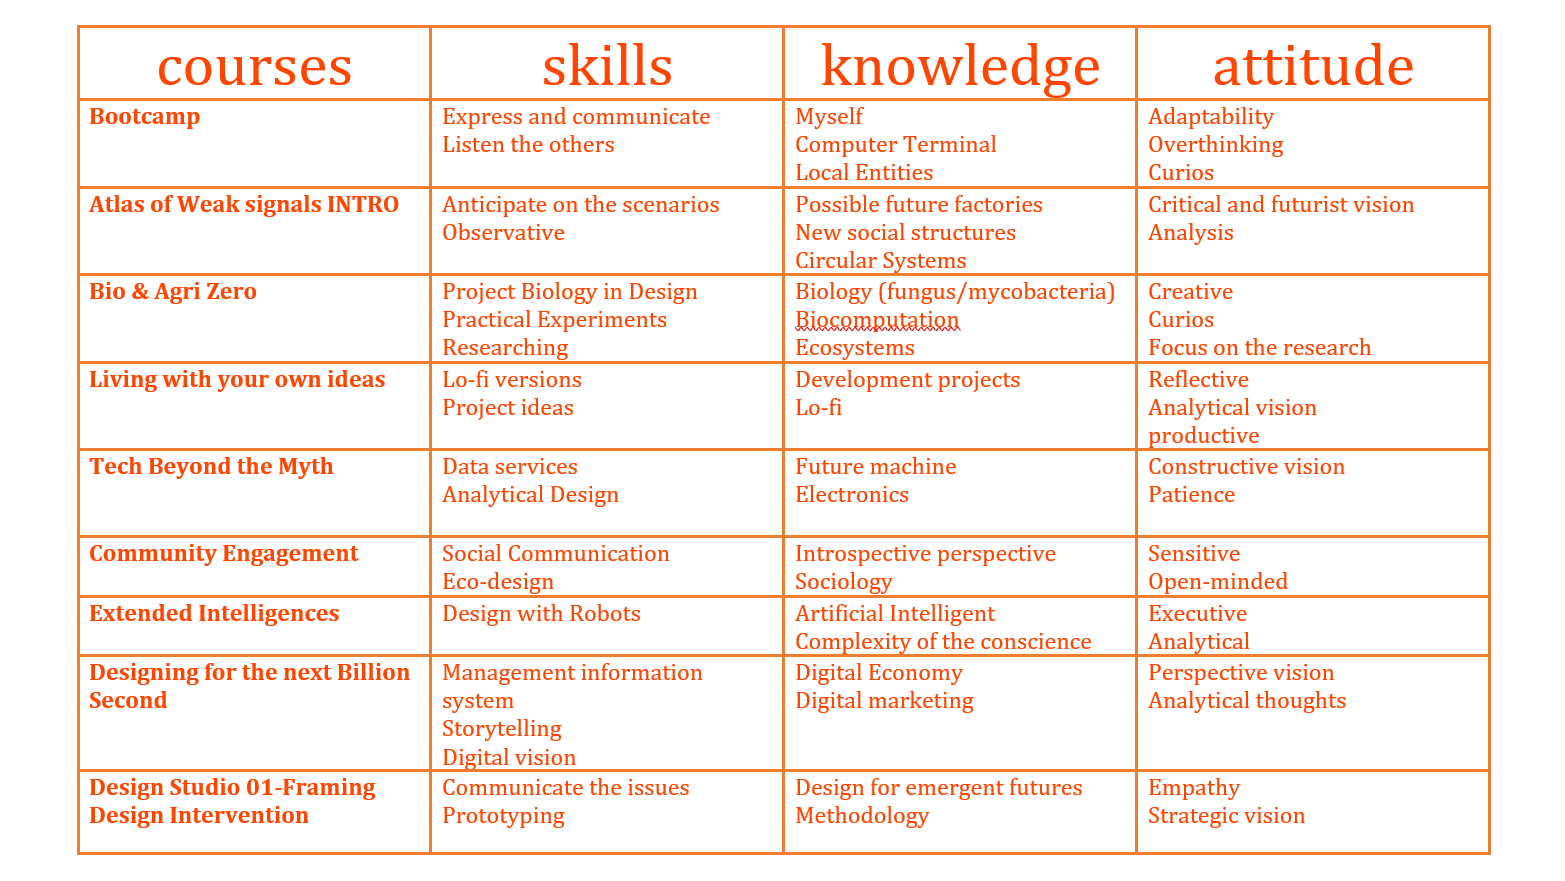 The skills actitud knowledge of all the courses